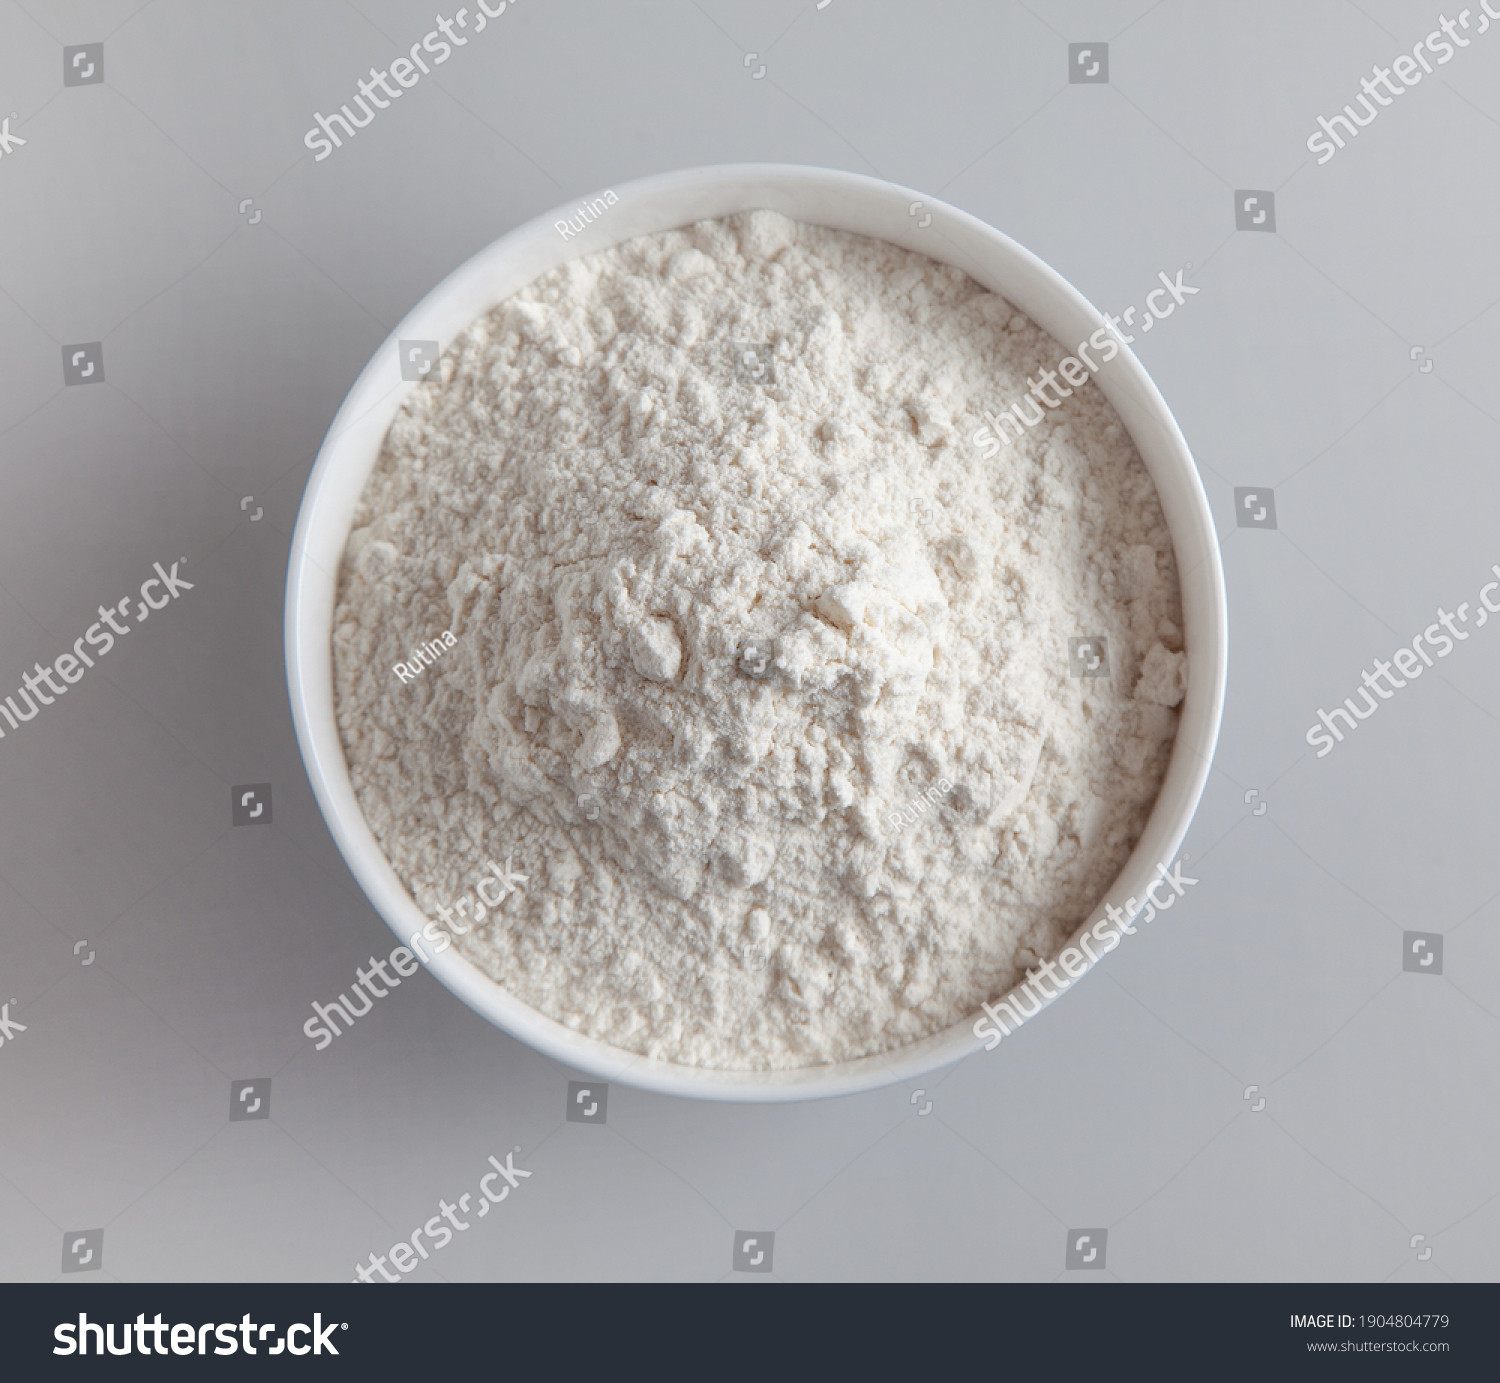 bowl of flour on grey kitchen table background, top view, selective focus #1904804779